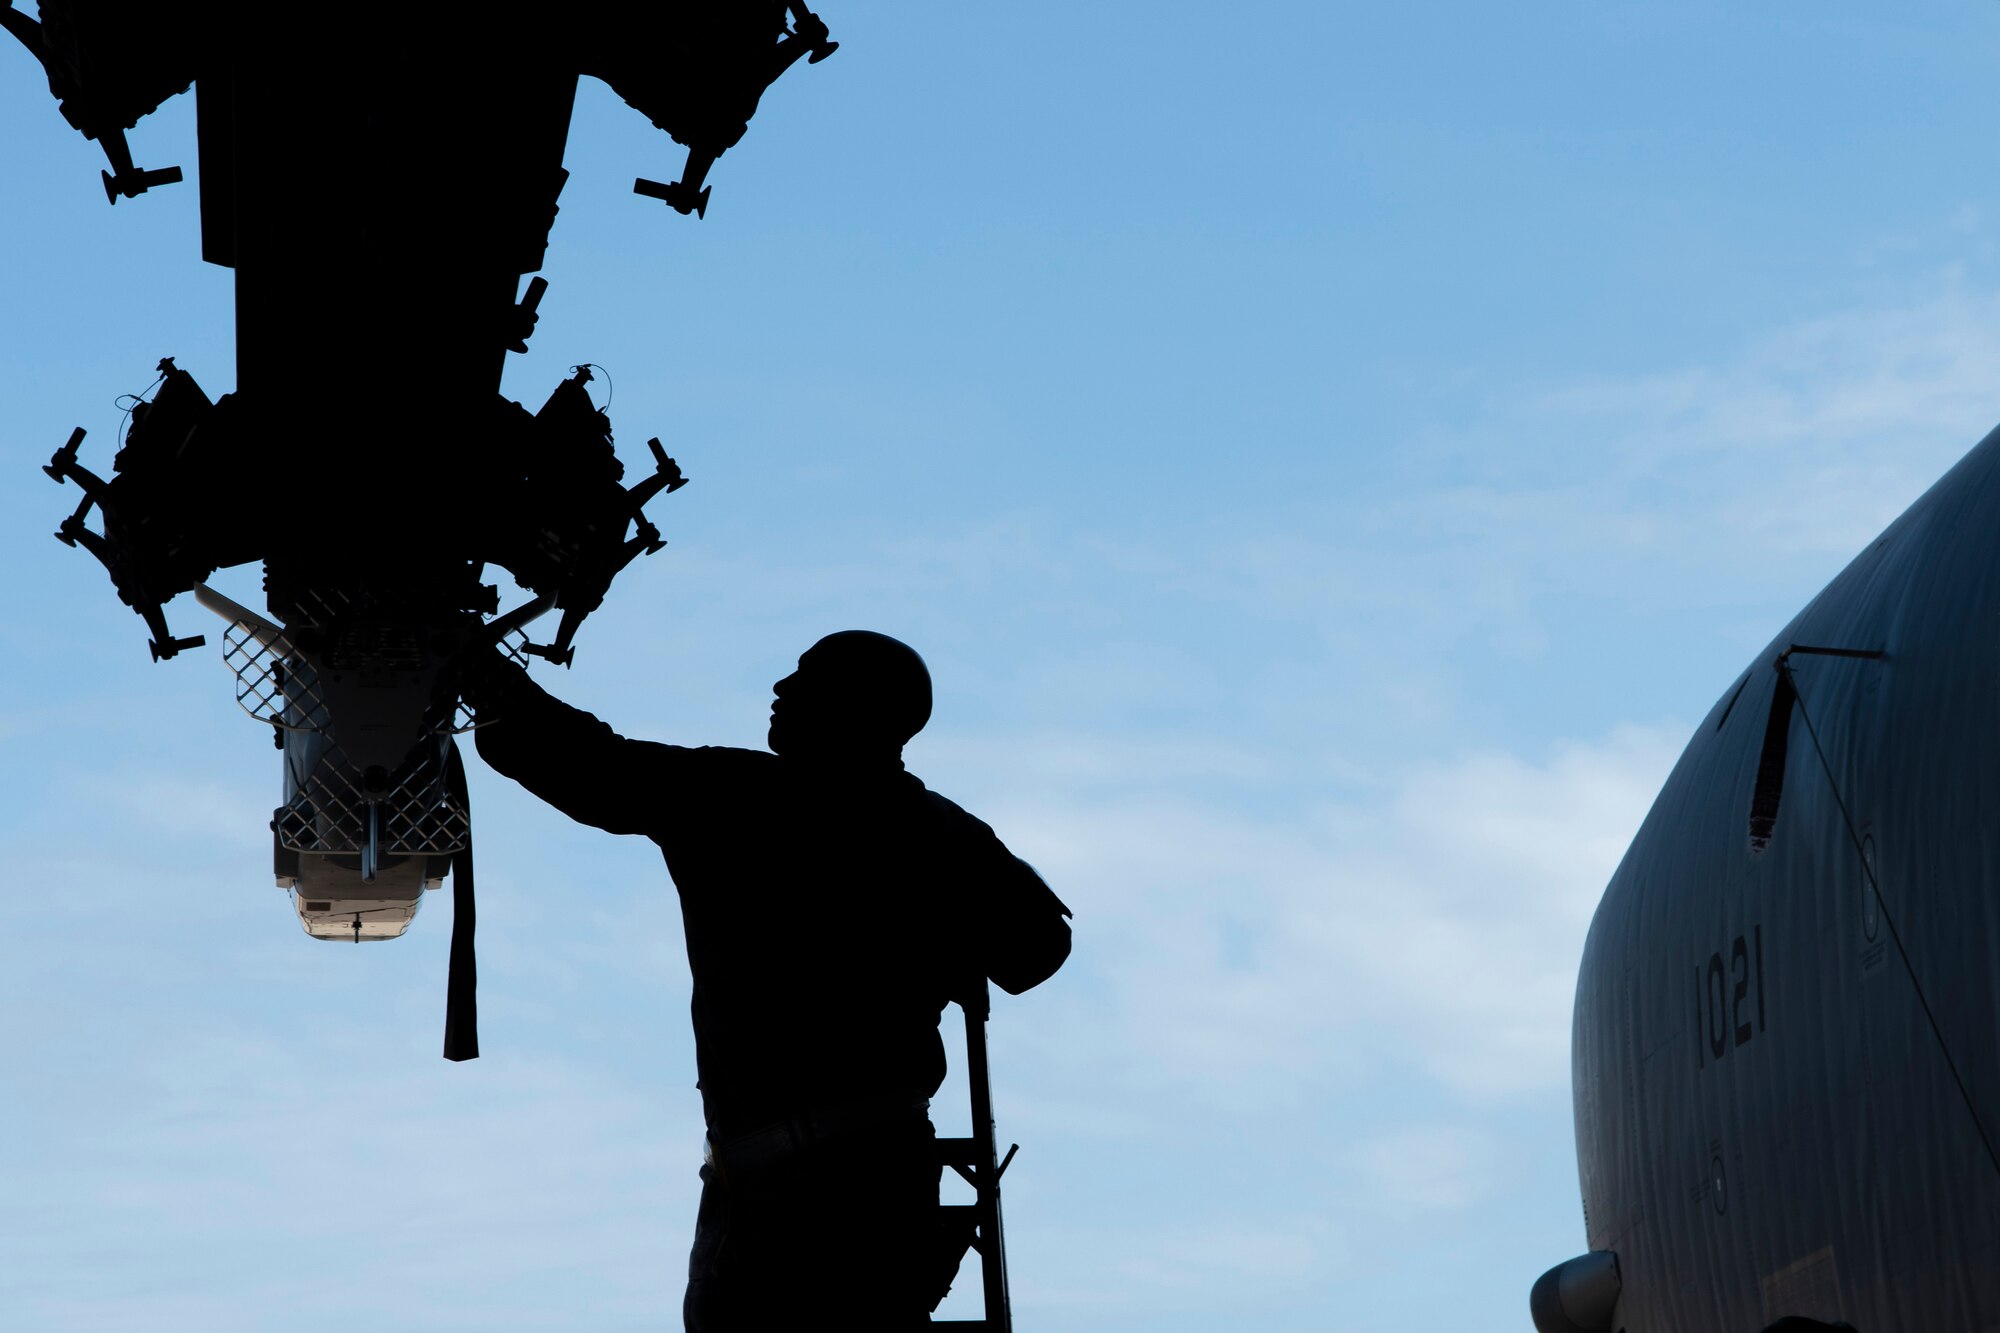 Airman is silhouetted while loading a bomb.